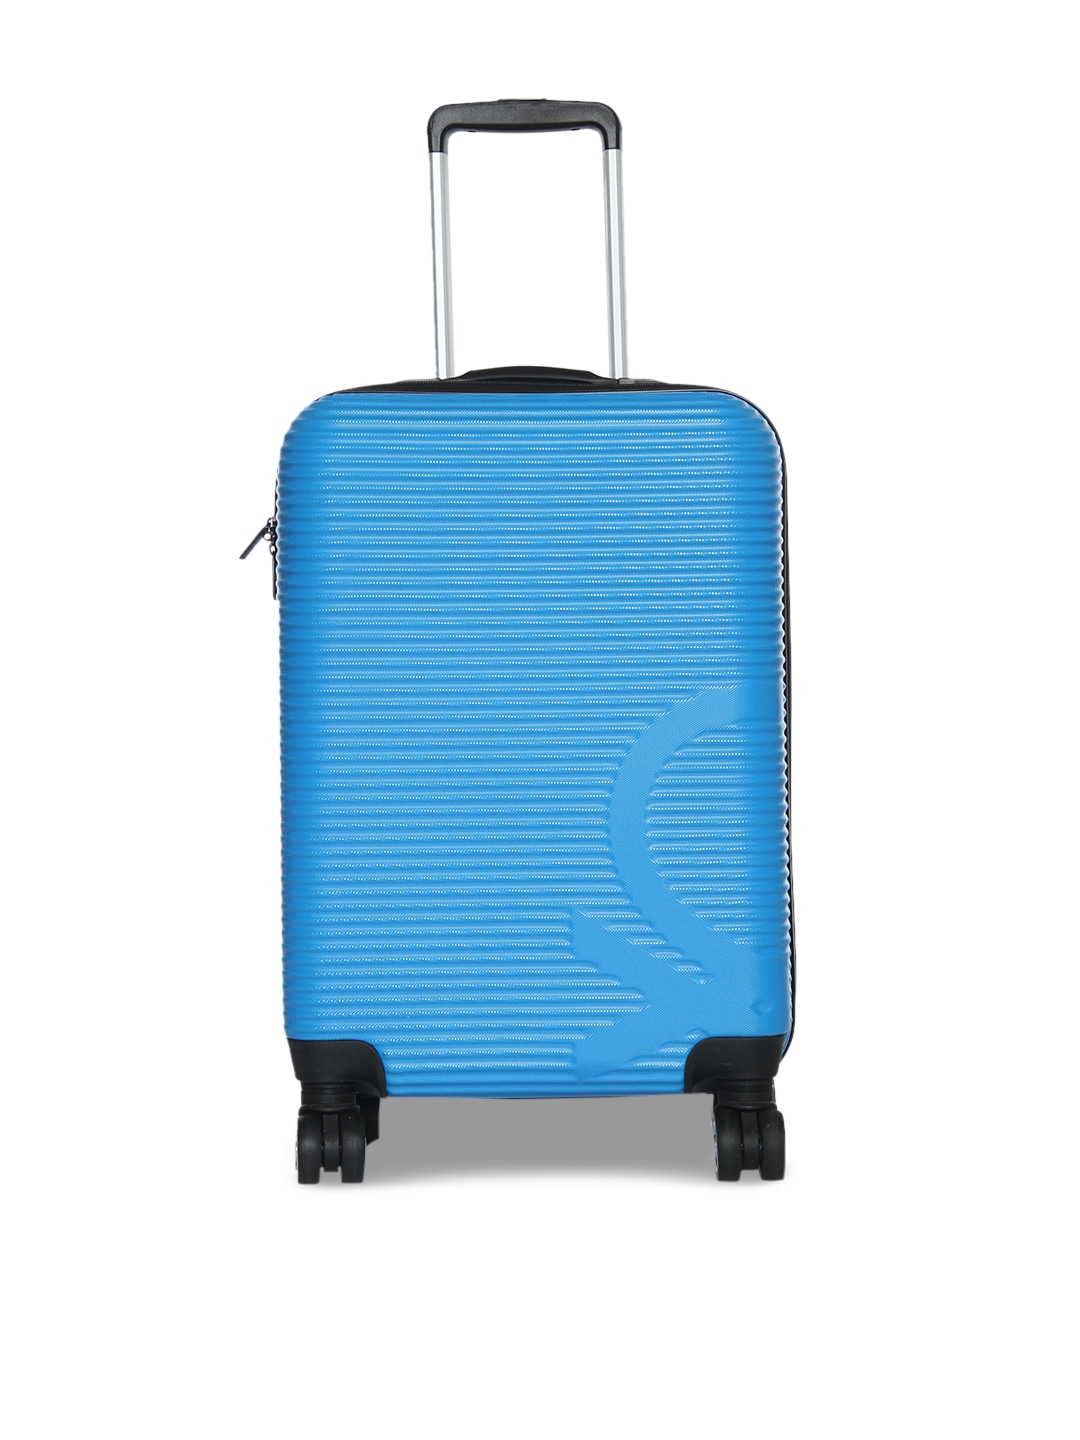 United Colors of Benetton Blue Cabin Trolley Suitcase Price in India